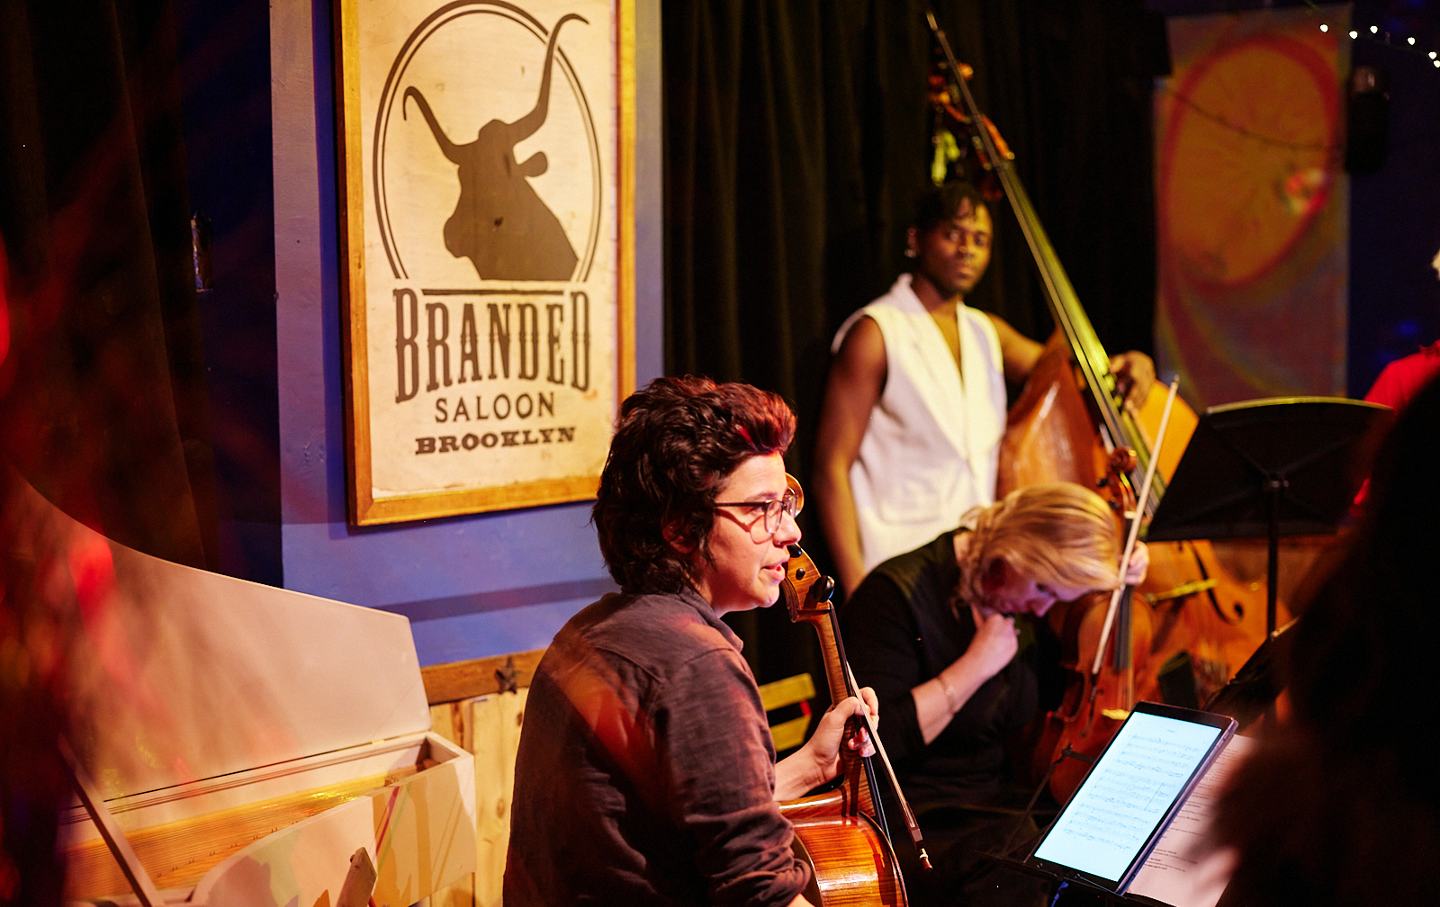 A ChamberQUEER performance at Branded Saloon in Brooklyn.